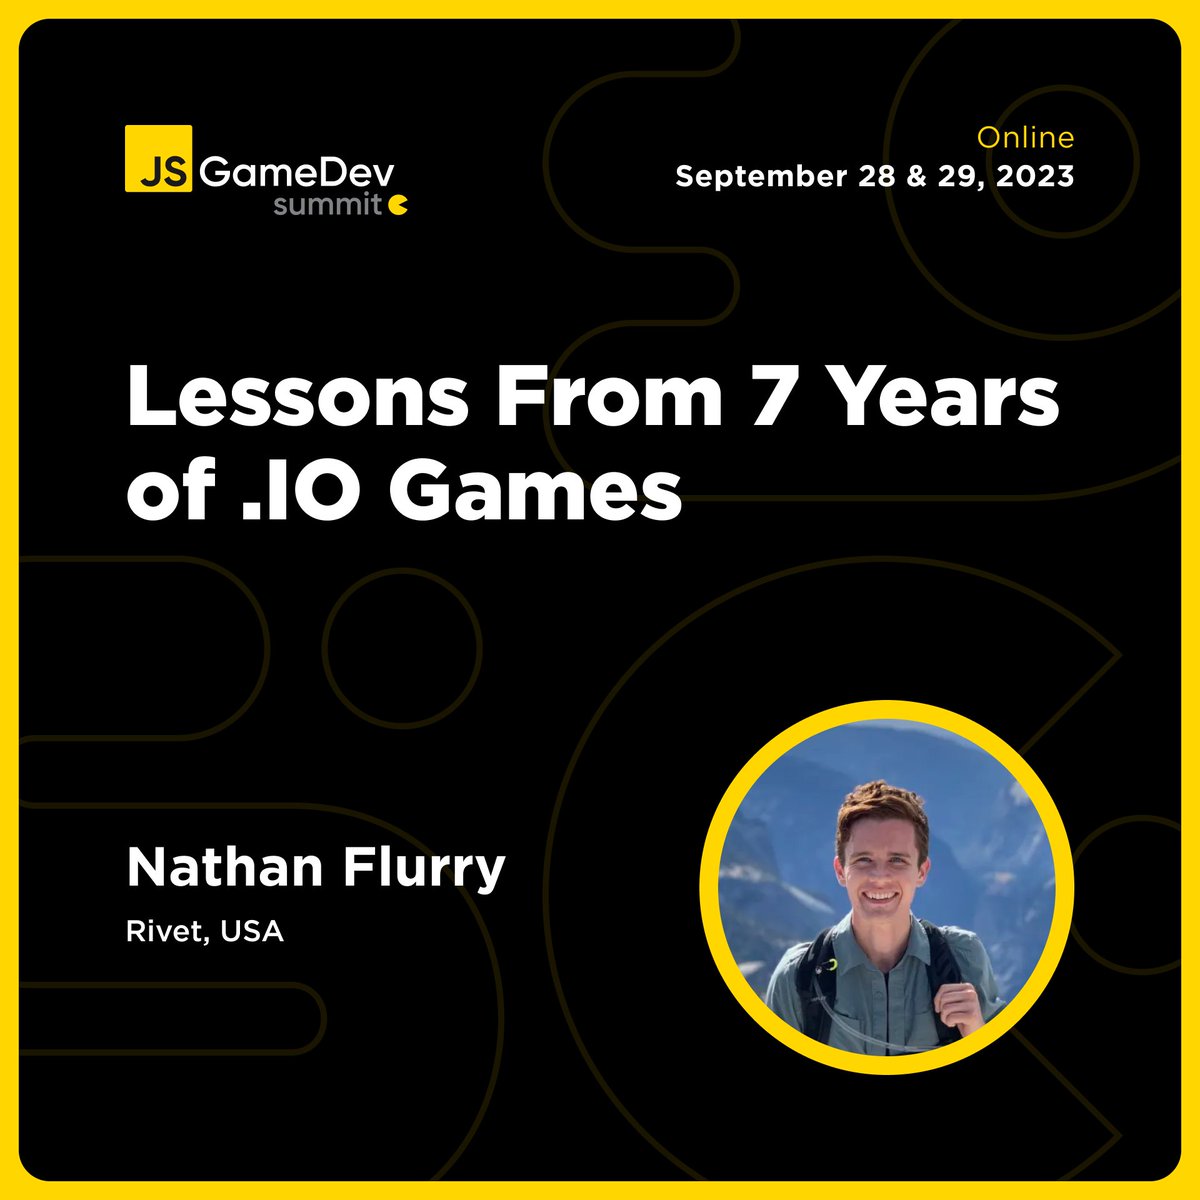 🎙️Having worked for 7 years on popular .io games like Krunker.io, Diep.io & Ev.io, @NathanFlurry has seen multiplayer #WebGame market grow & evolve on the bleeding edge of web tech over the years. Join us👉jsgamedev.com